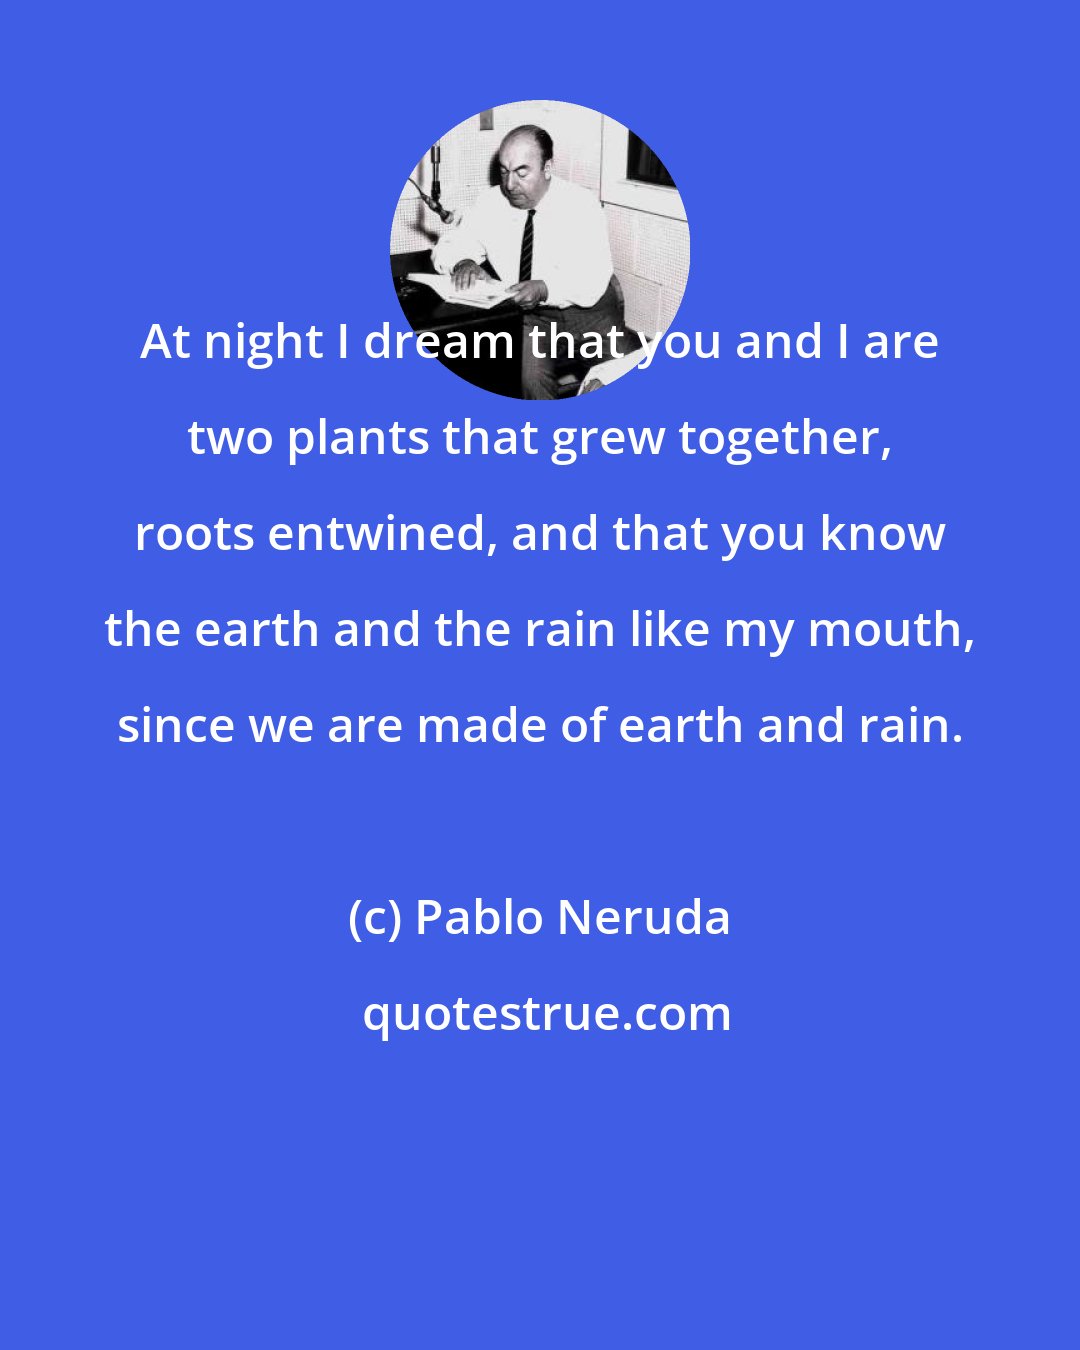 Pablo Neruda: At night I dream that you and I are two plants that grew together, roots entwined, and that you know the earth and the rain like my mouth, since we are made of earth and rain.